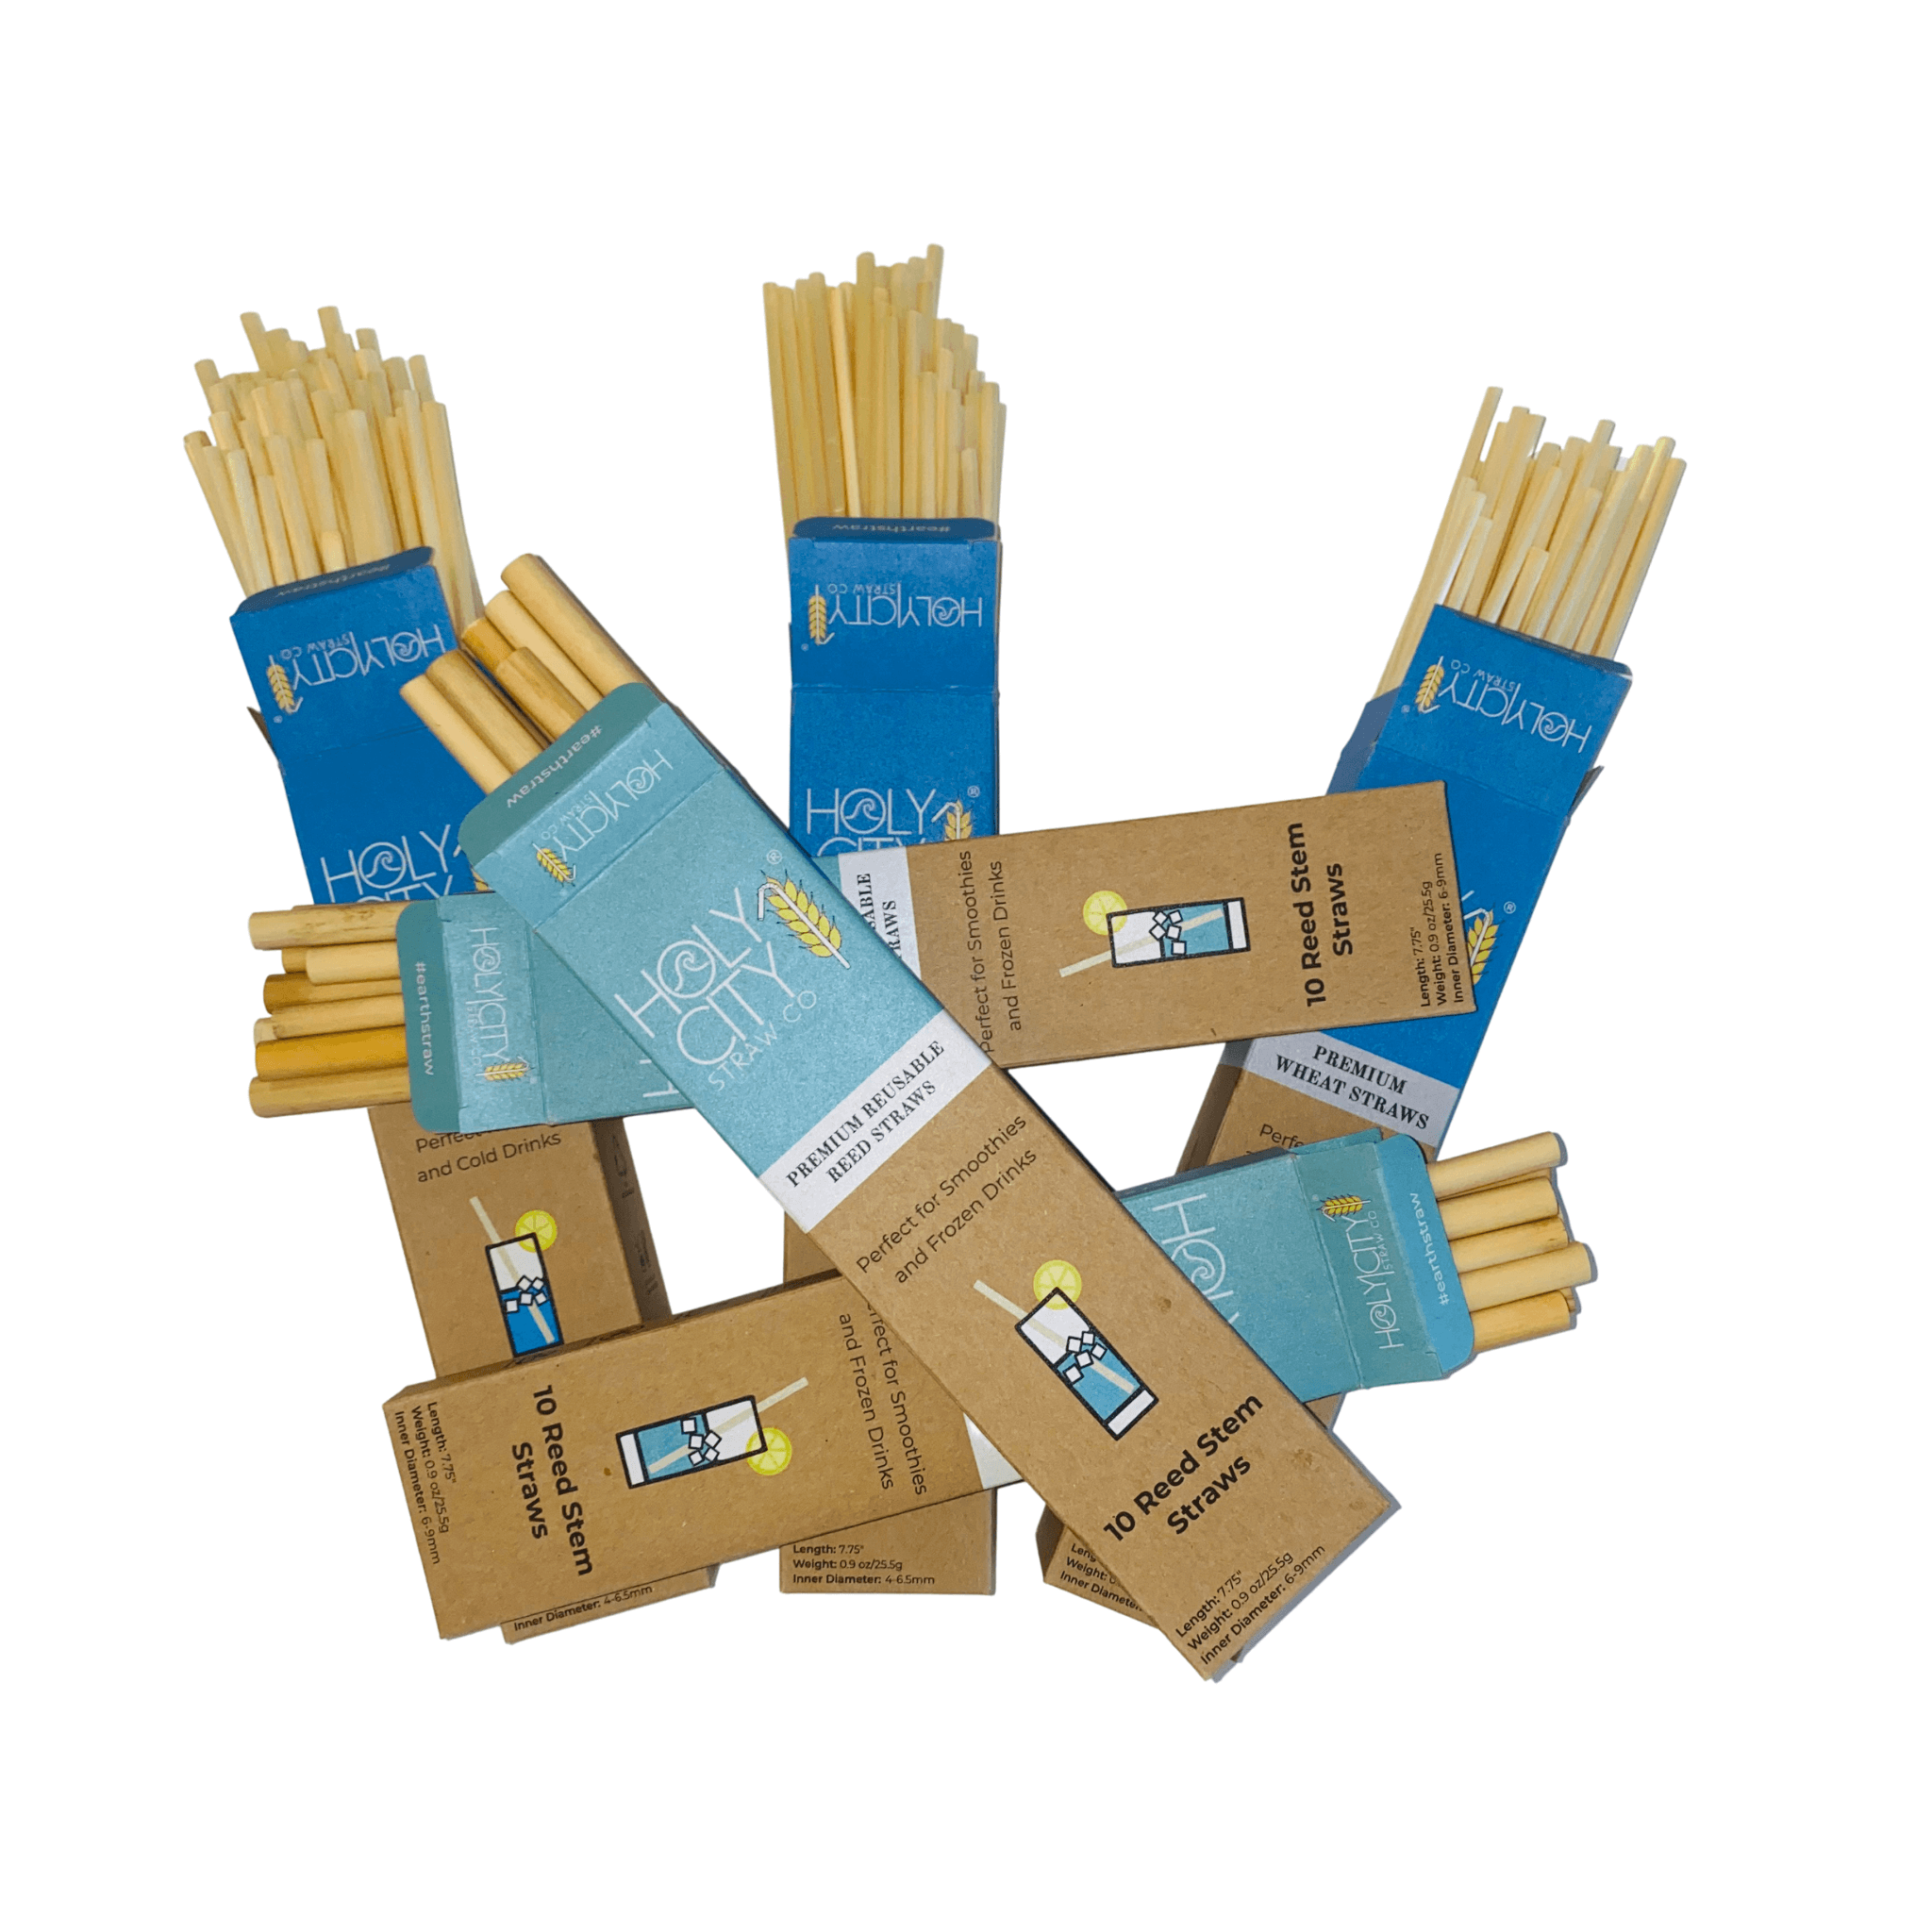 Wheat and Reed Straw Bundle - 6 Pack.